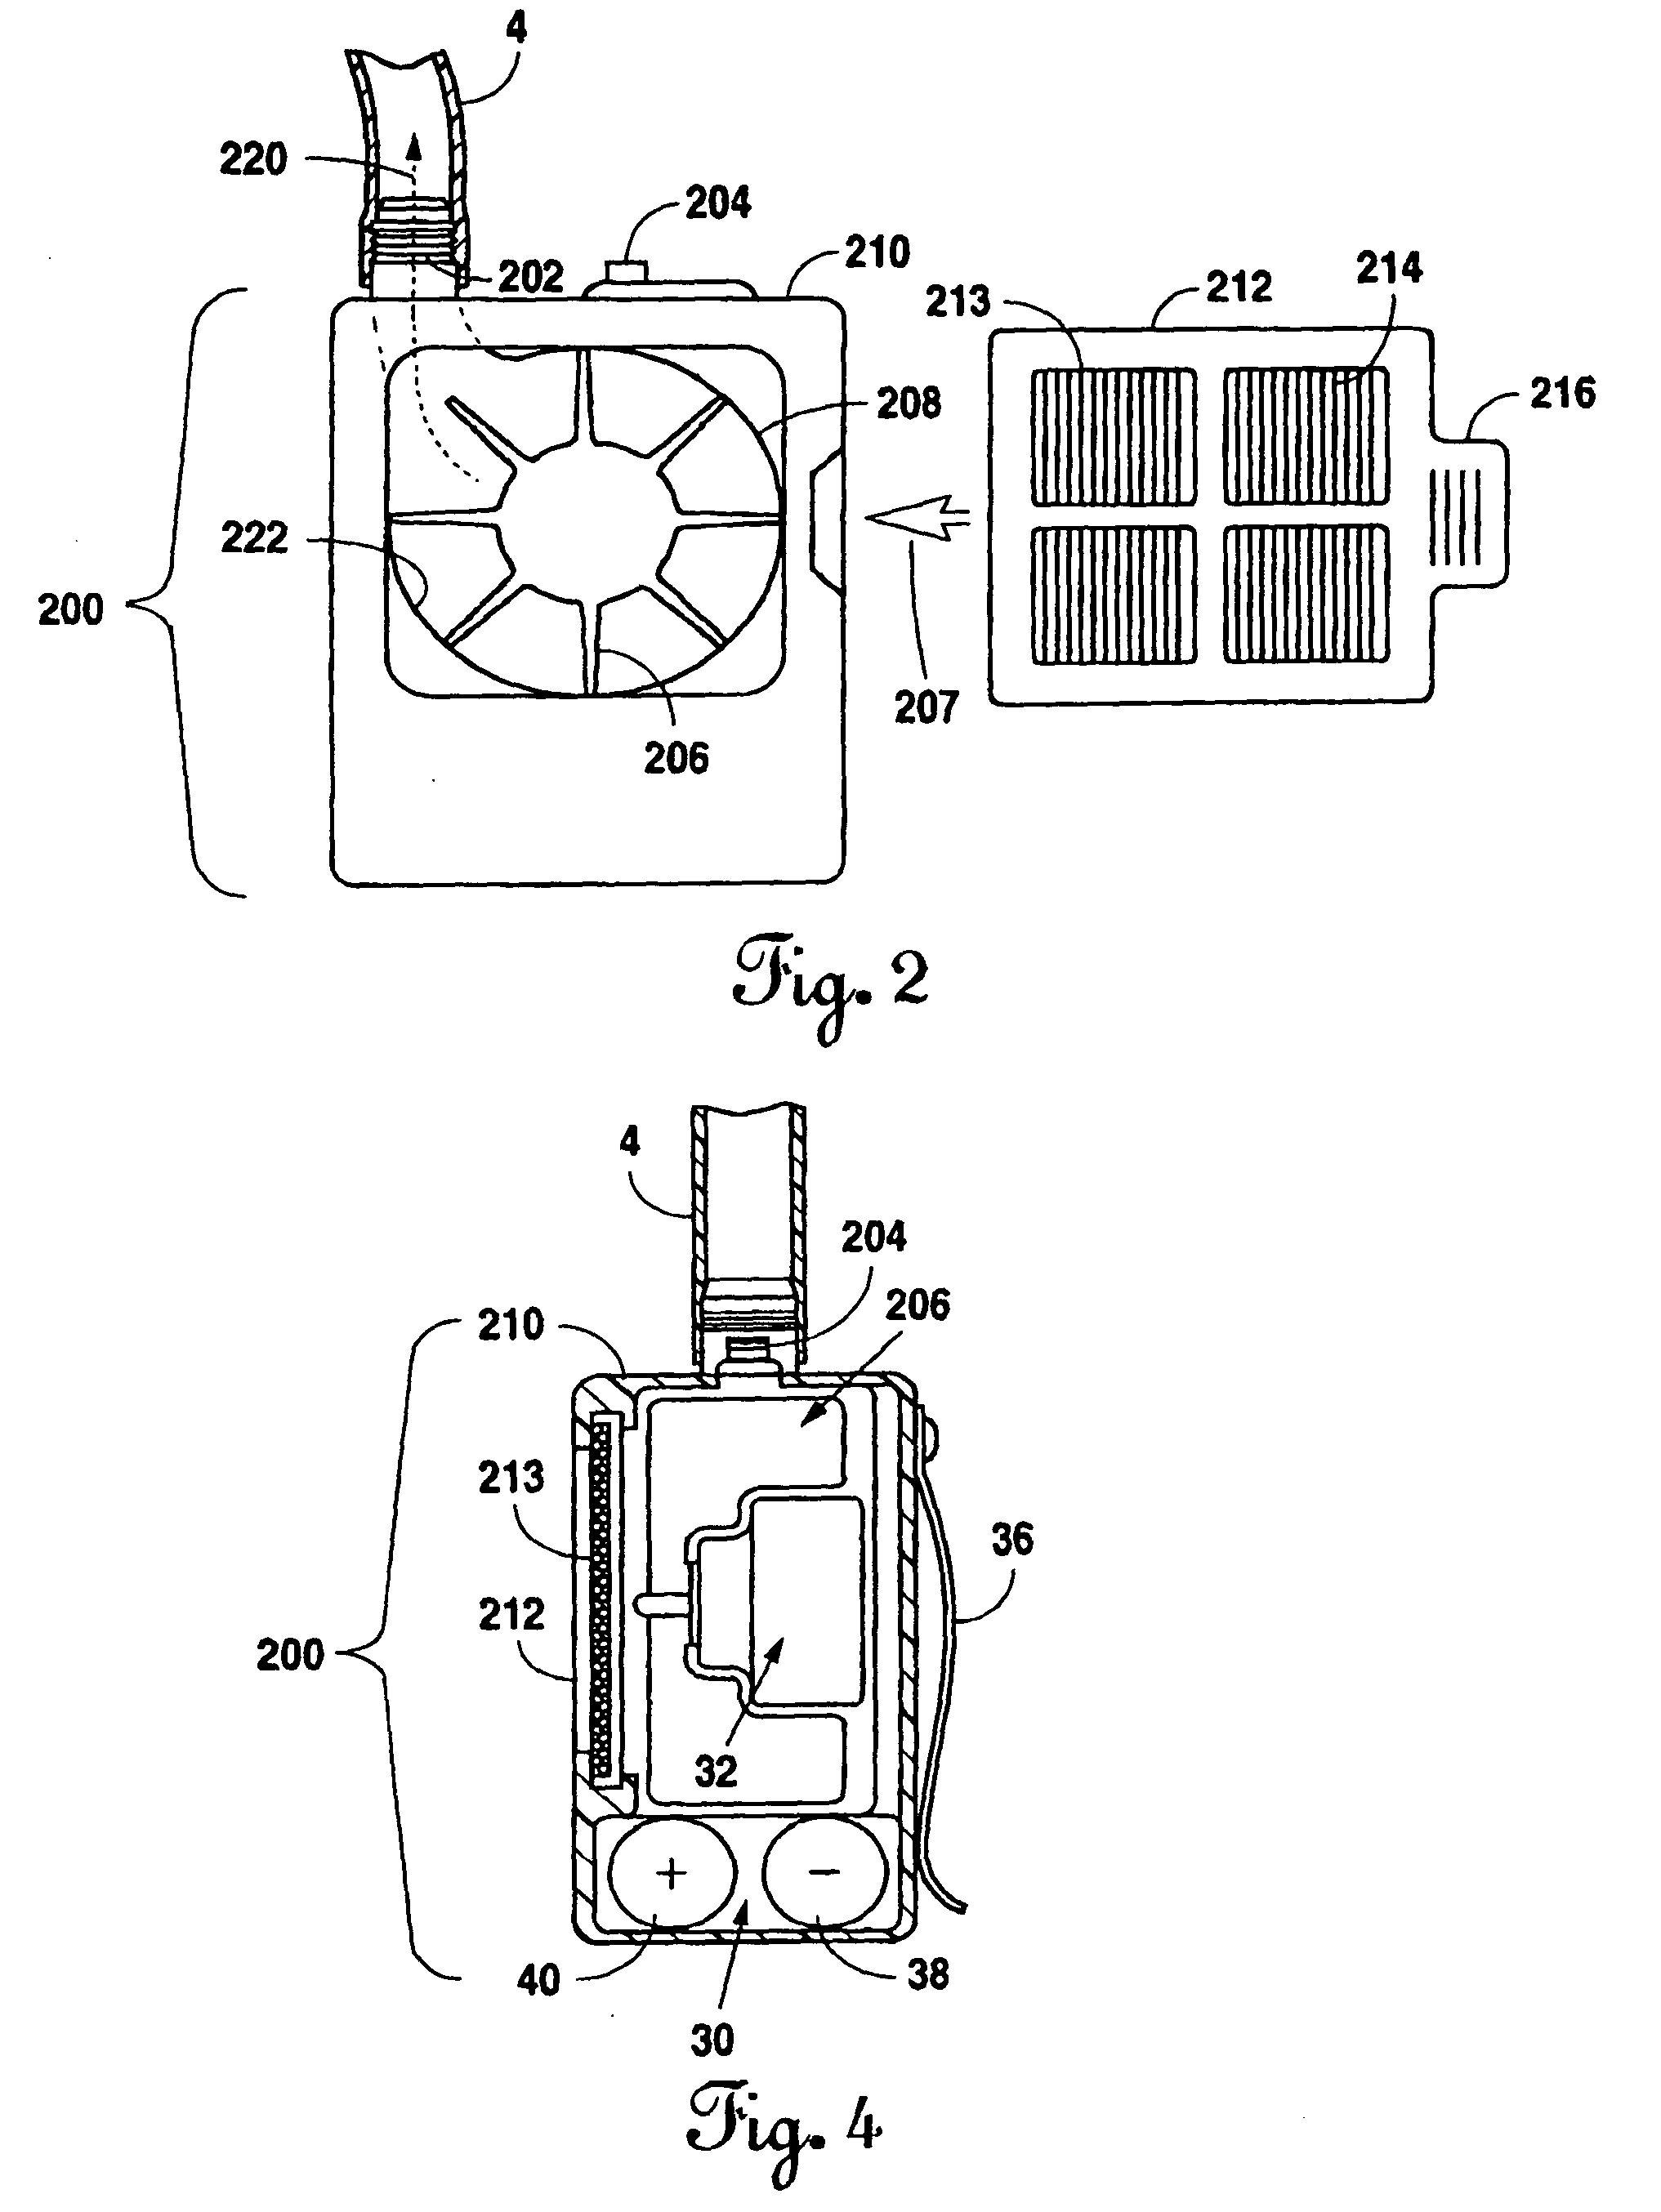 Personal air filtering and isolation device